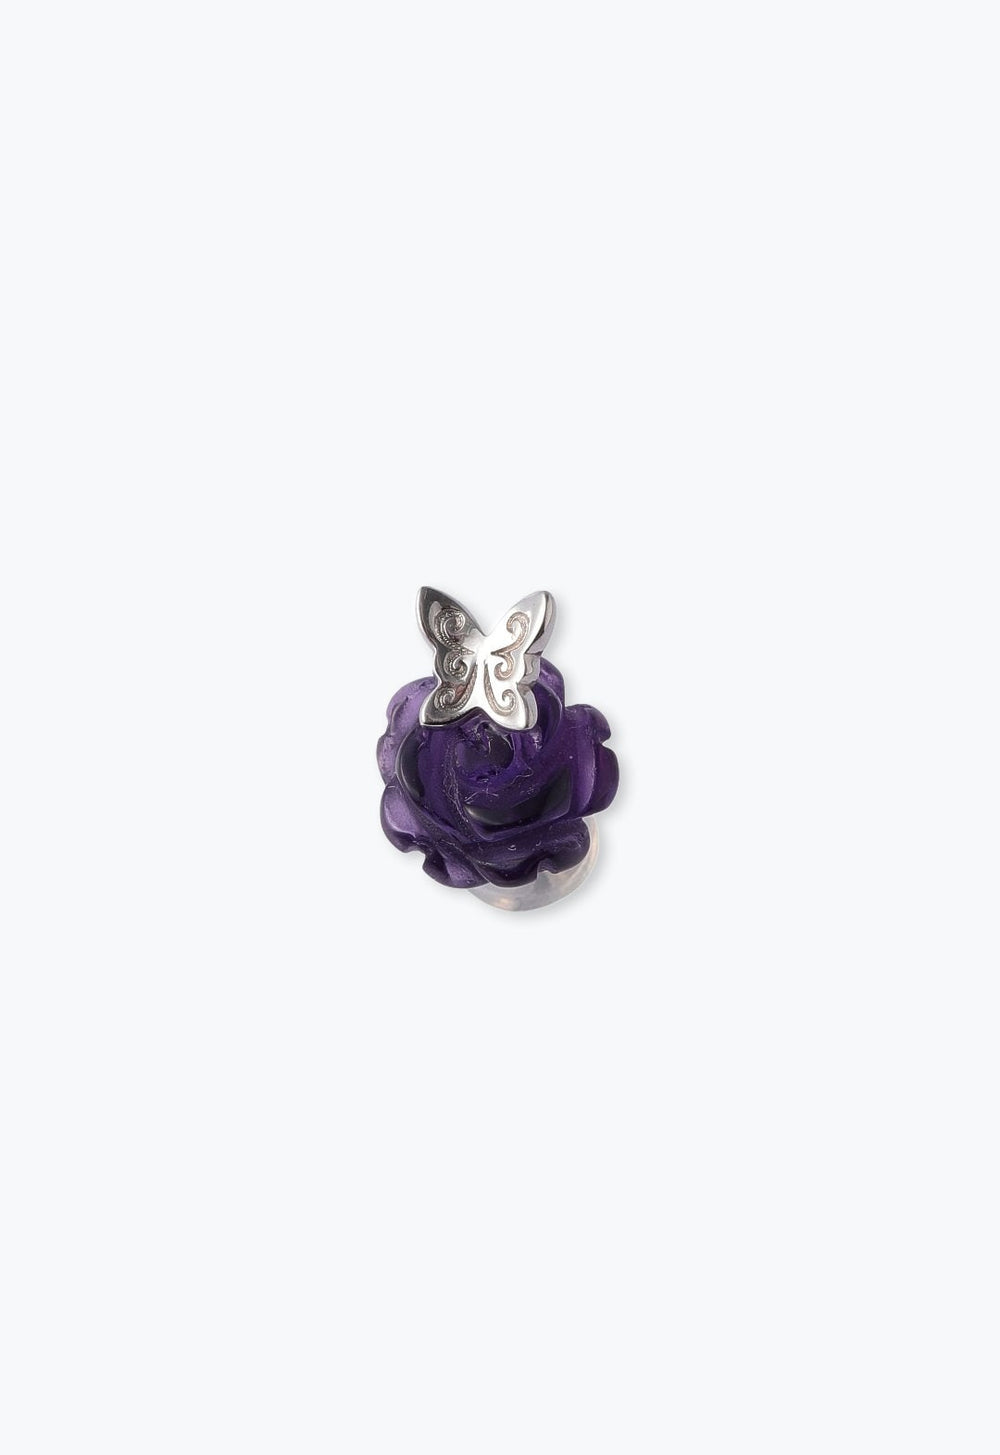 The stylized silver butterfly is positioned on an amethyst rose with a more realistic cut